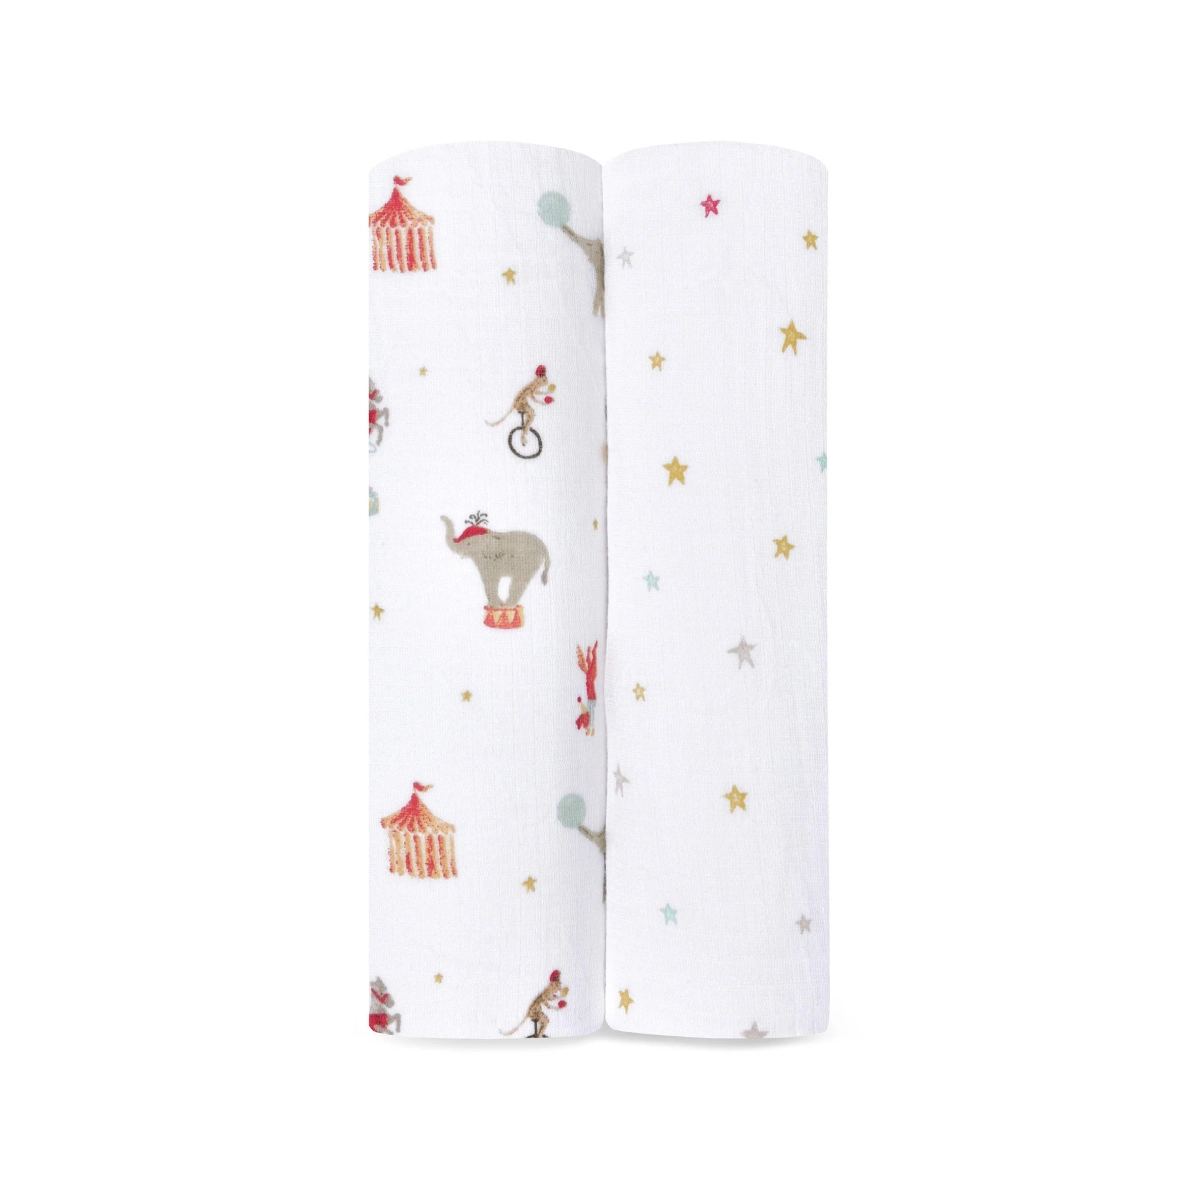 Image of Aden + Anais Pack of 2 Essentials Cotton Muslin Swaddle Blanket - Elephant Circus (23-19-262)